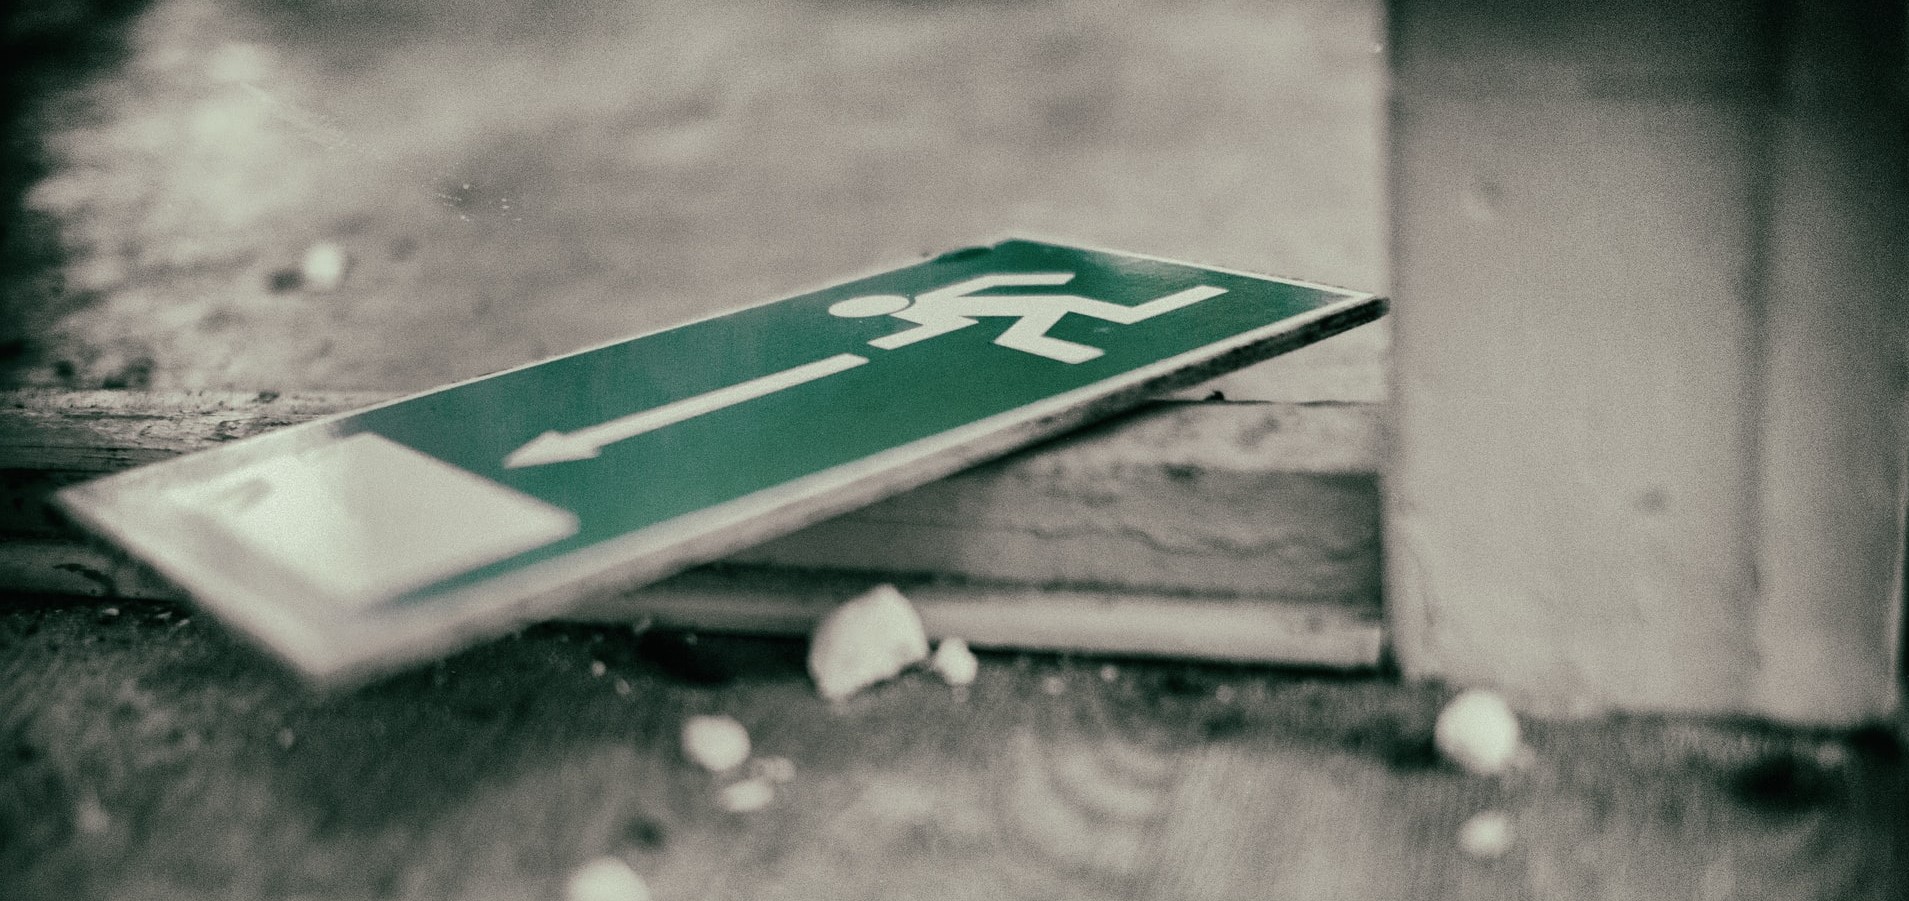 law firm disaster preparedness picture: exit sign lying on floor amid a small amount of debris